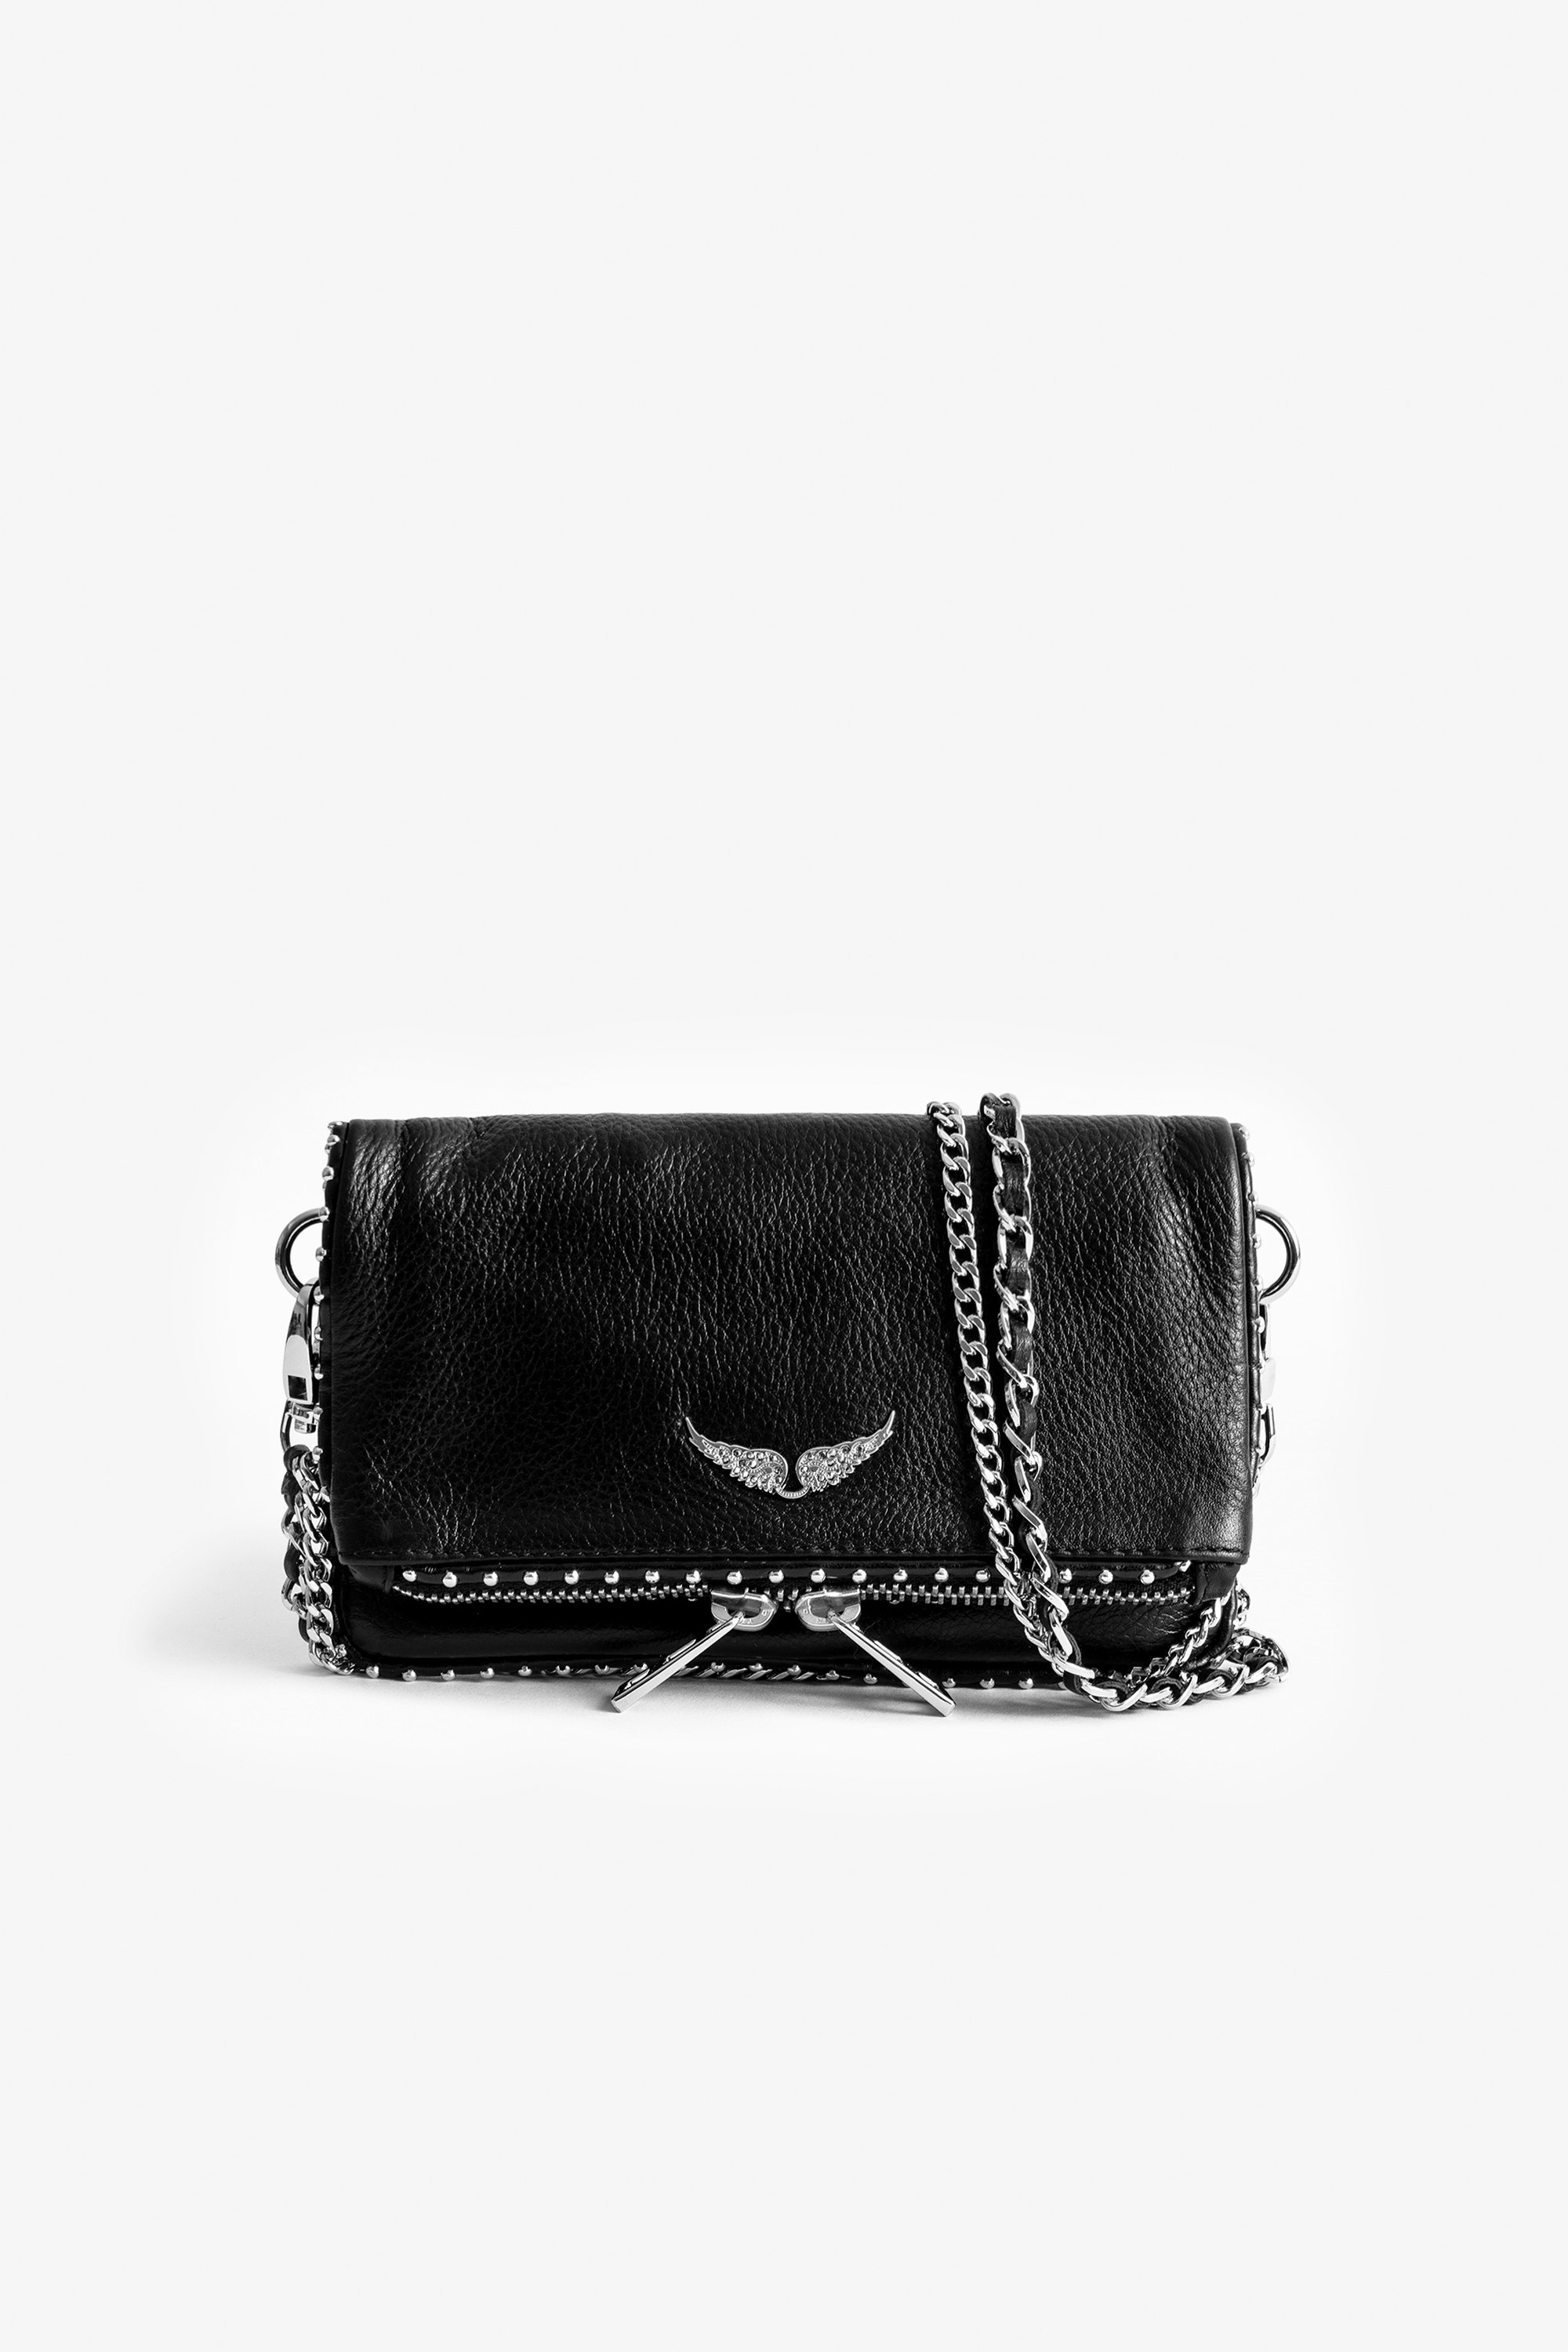 Rock Nano Studs クラッチバッグ - Women's black mini clutch in leather, embellished with studs.